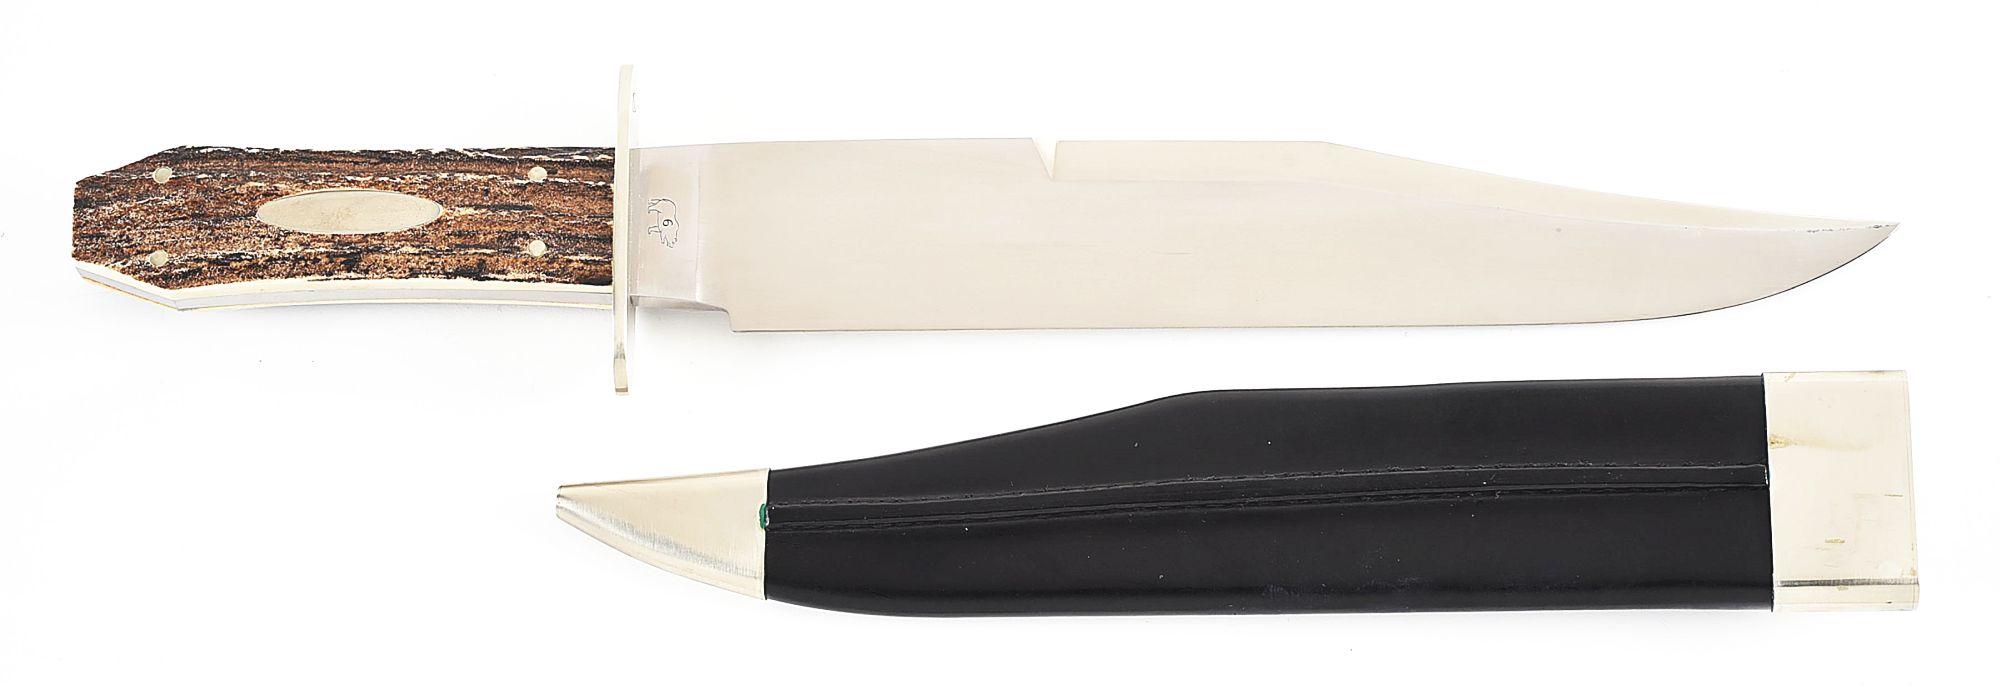 D.E. HENRY COFFIN HANDLED BOWIE KNIFE.